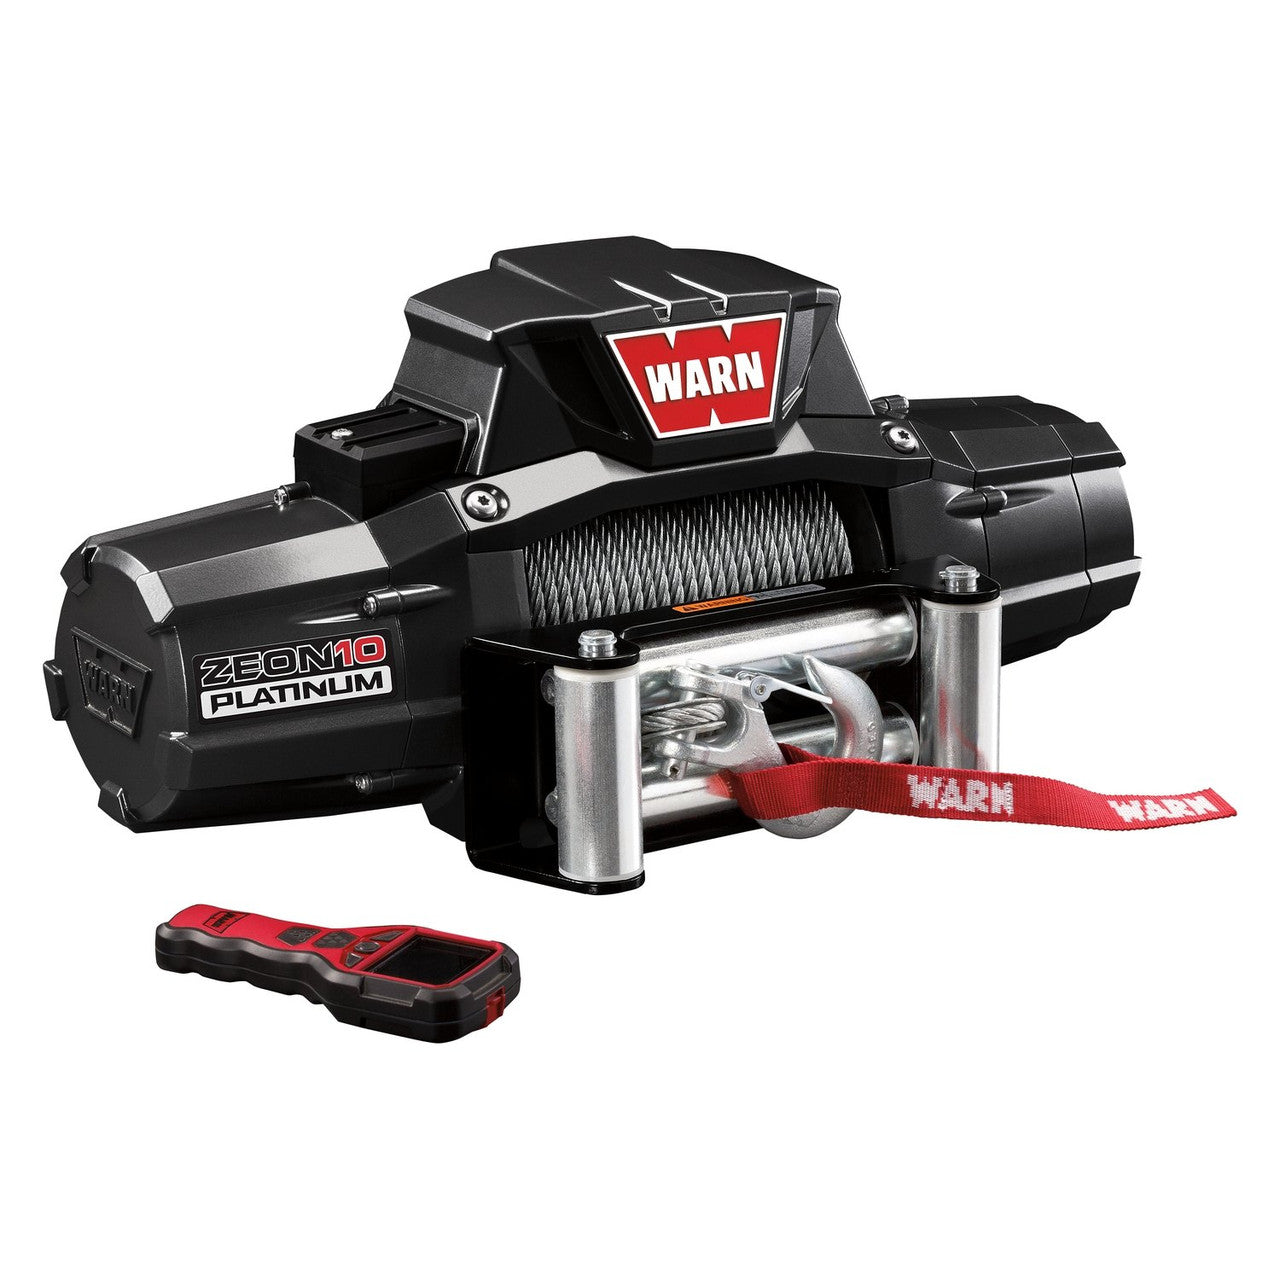 WARN ZEON Platinum 10 Electric Winch 10000 Lbs 12V DC - Wire Rope